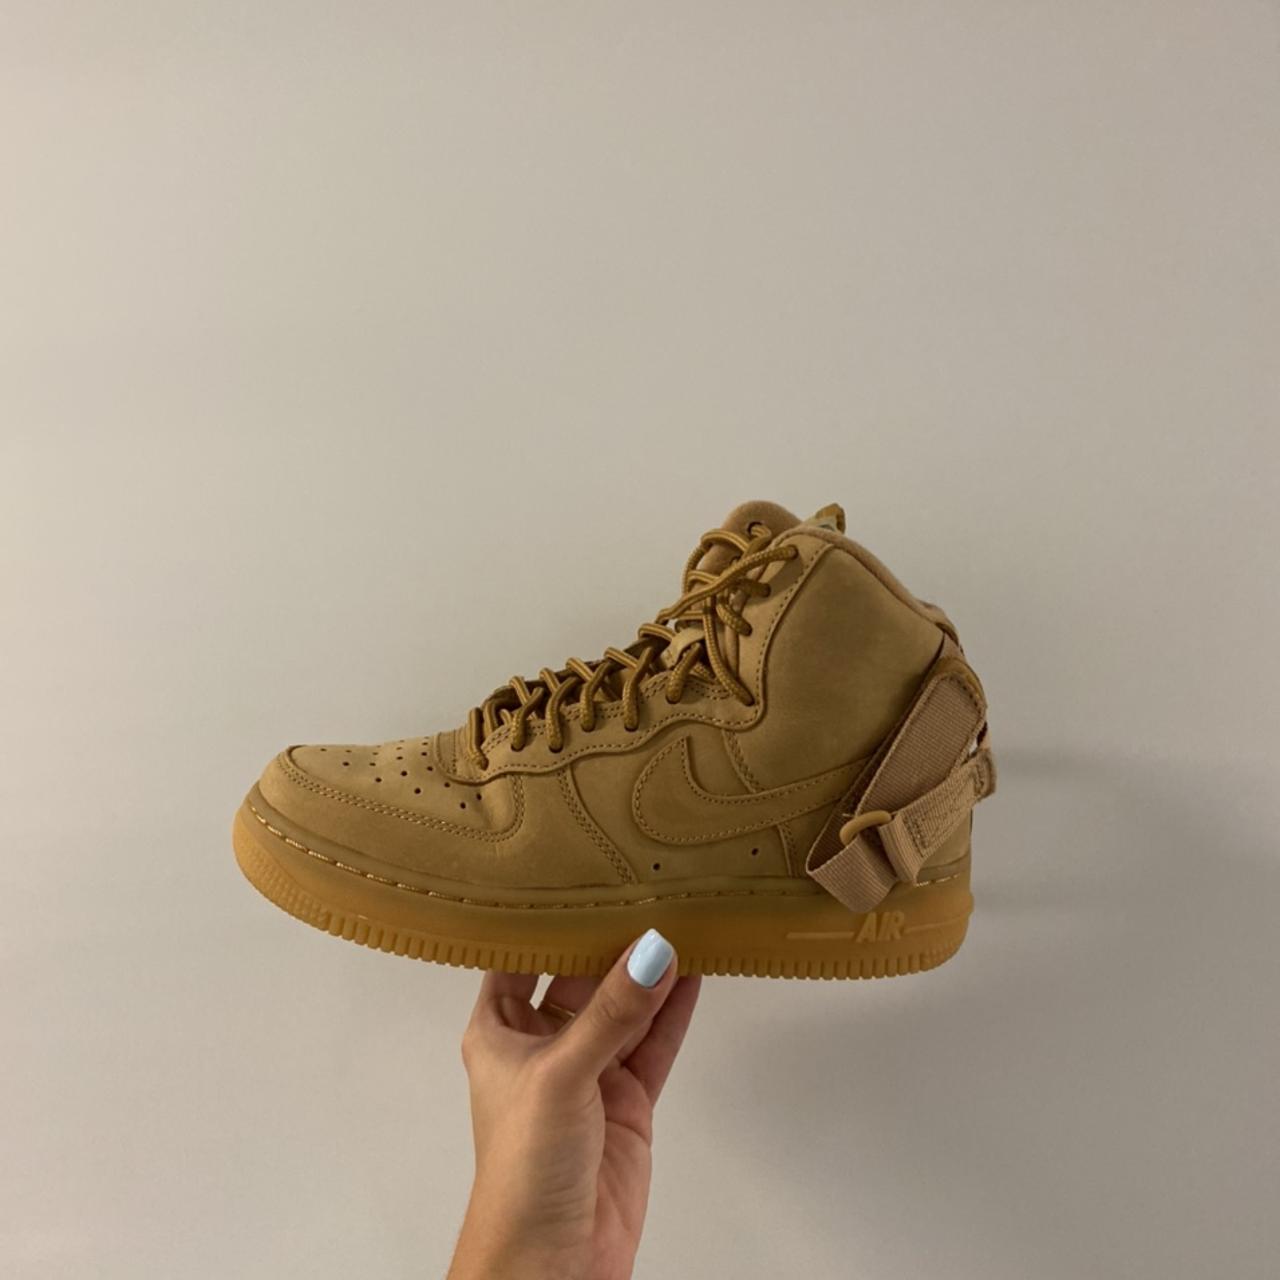 Nike Air Force 1 High LV8 3 Shoes in Wheat/Gum Light - Depop